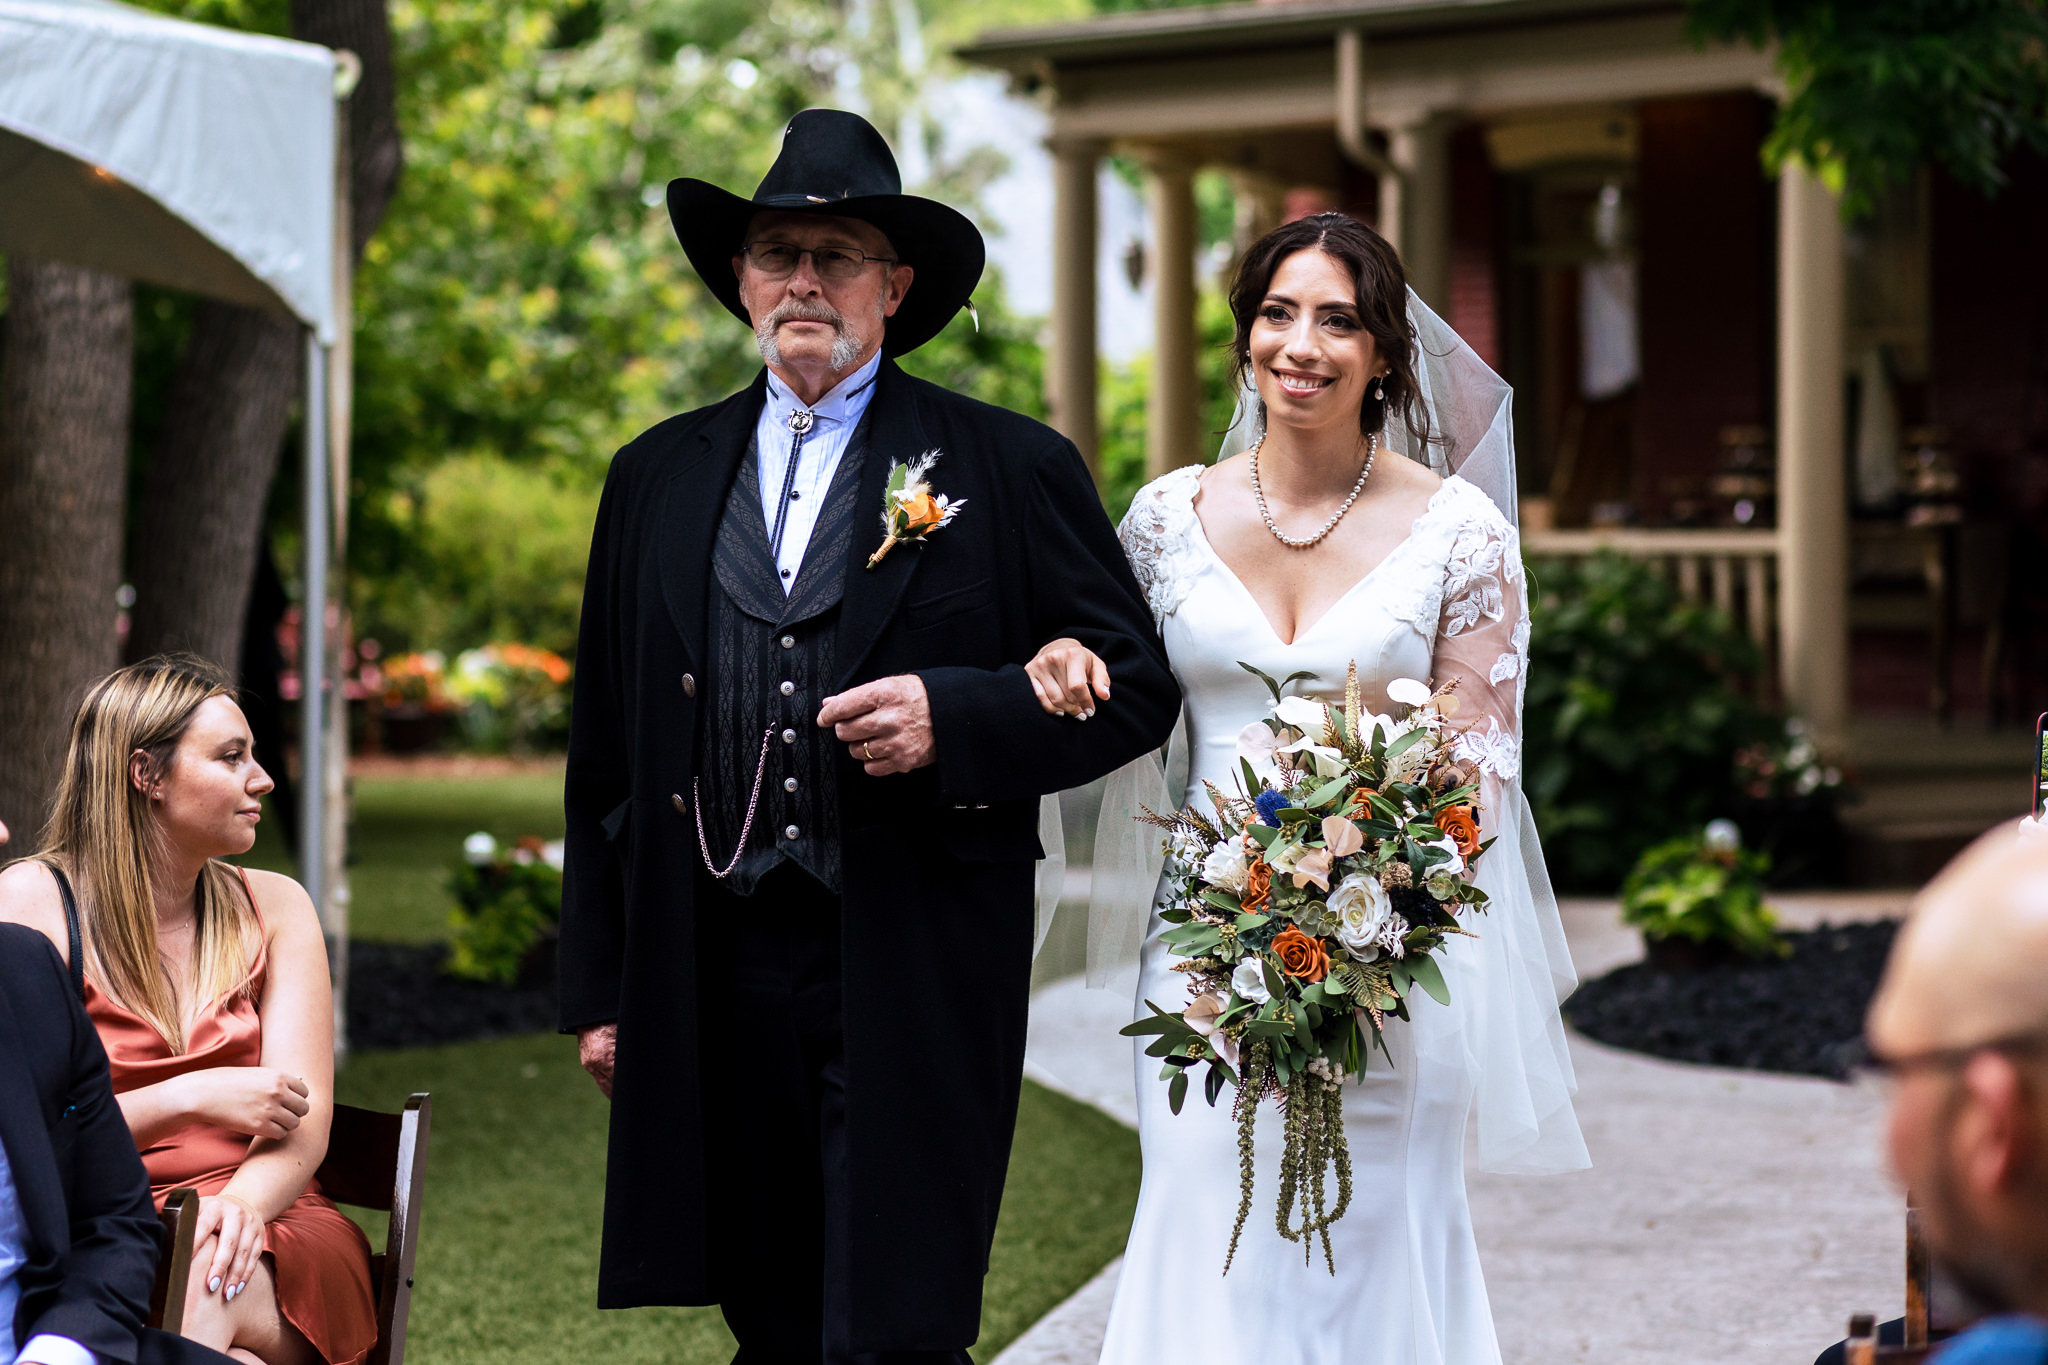 Bride walking down the aisle with her father for Haley & Gytenis' Summer Wedding at The McCreery House by Colorado Wedding Photographer, Jennifer Garza.